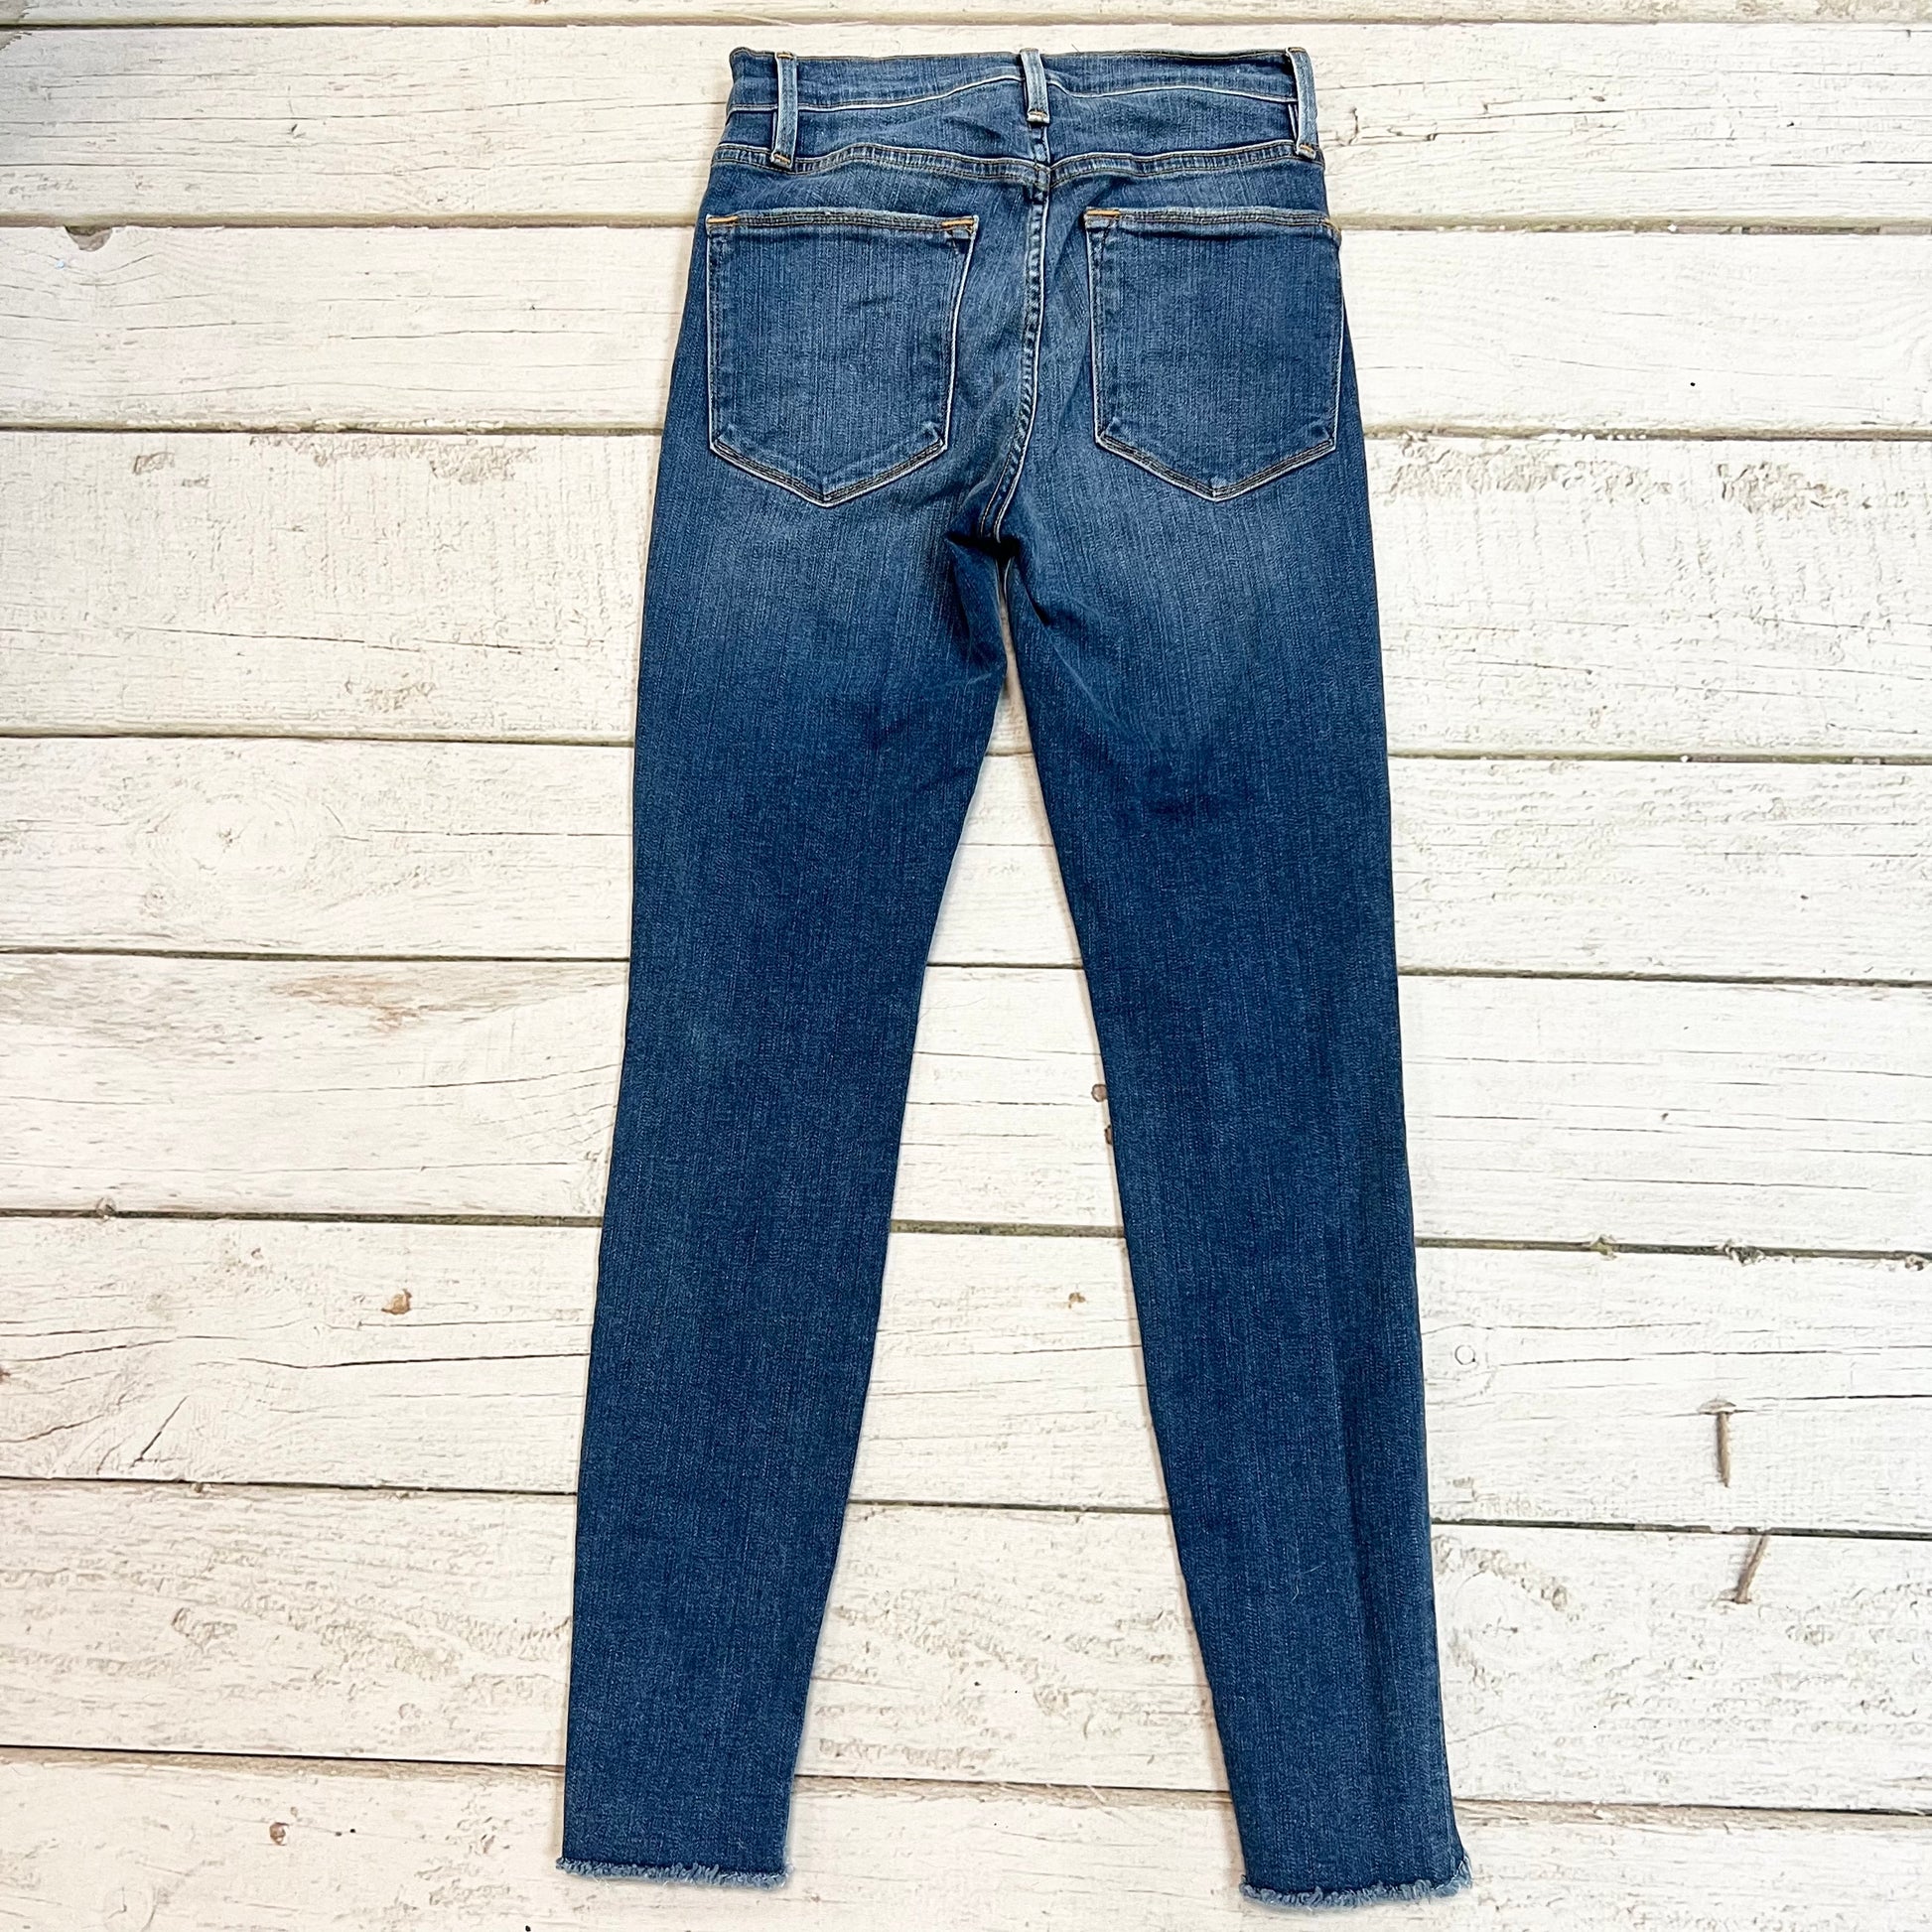 Blueprint Permanent Landbrugs Jeans Skinny By Frame Size: 0 – Clothes Mentor Springfield PA #217